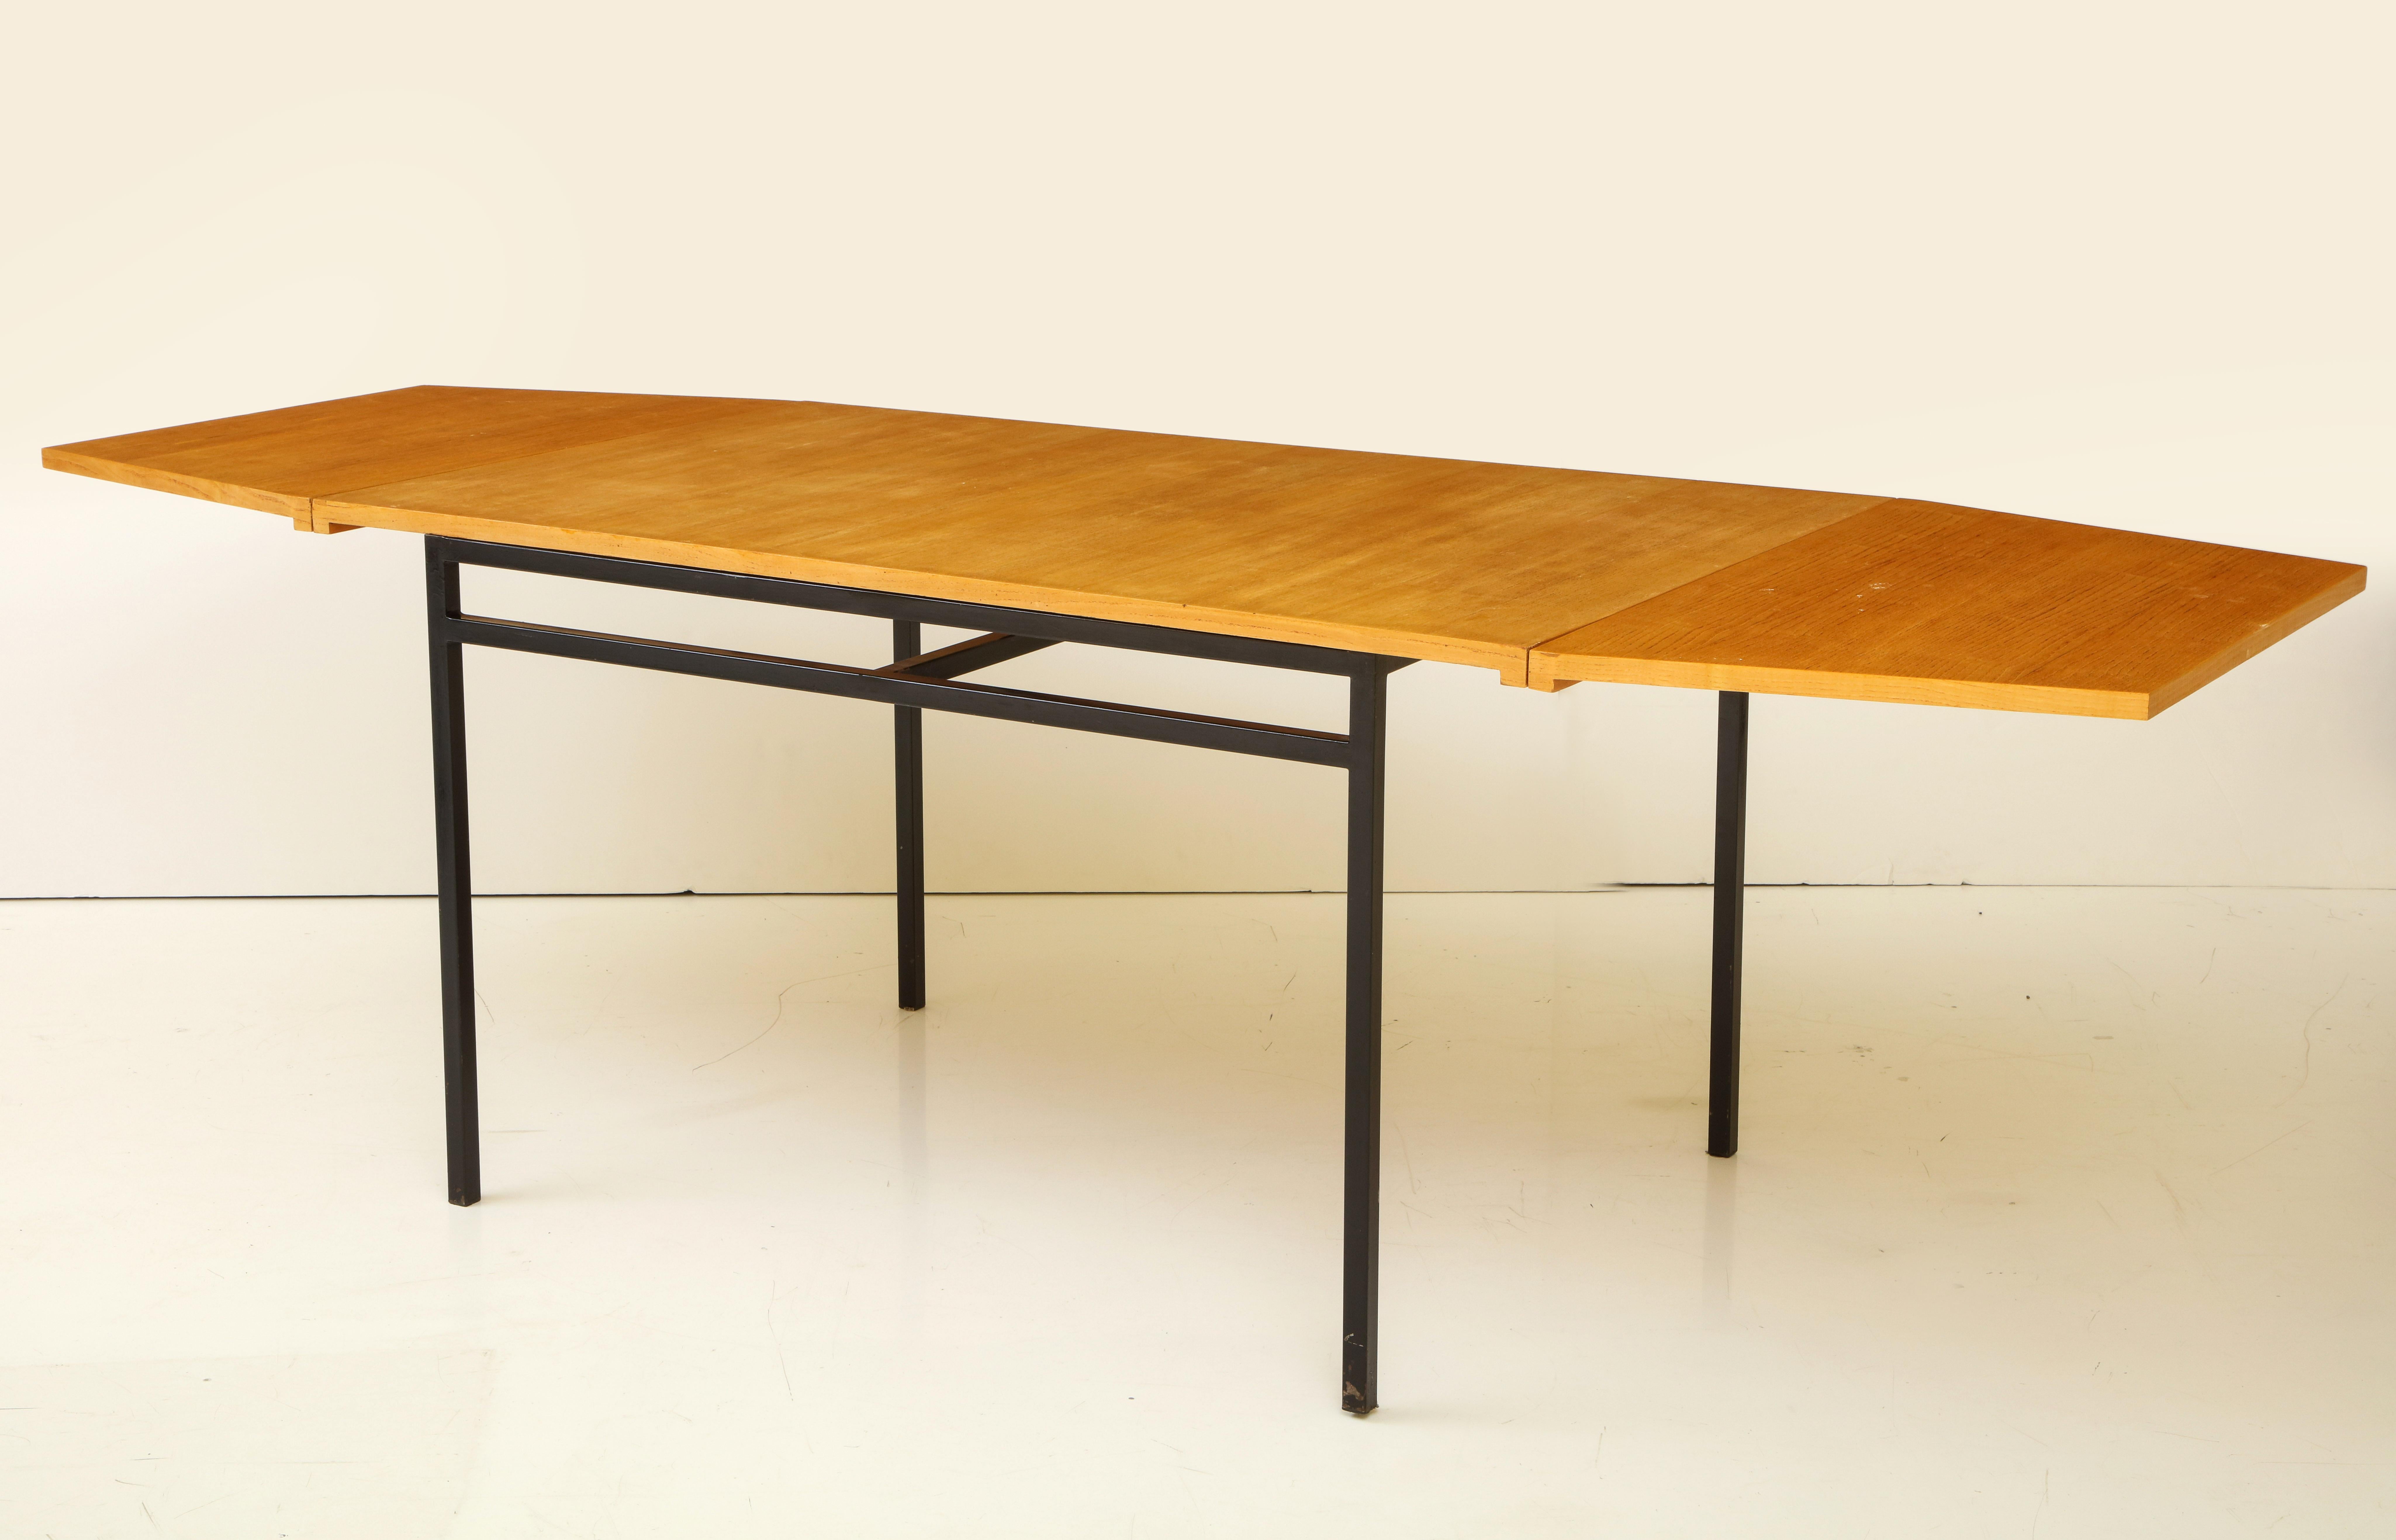 France, 1960s.
Ash veneer
two leaves tuch under the table; they add another 19.75